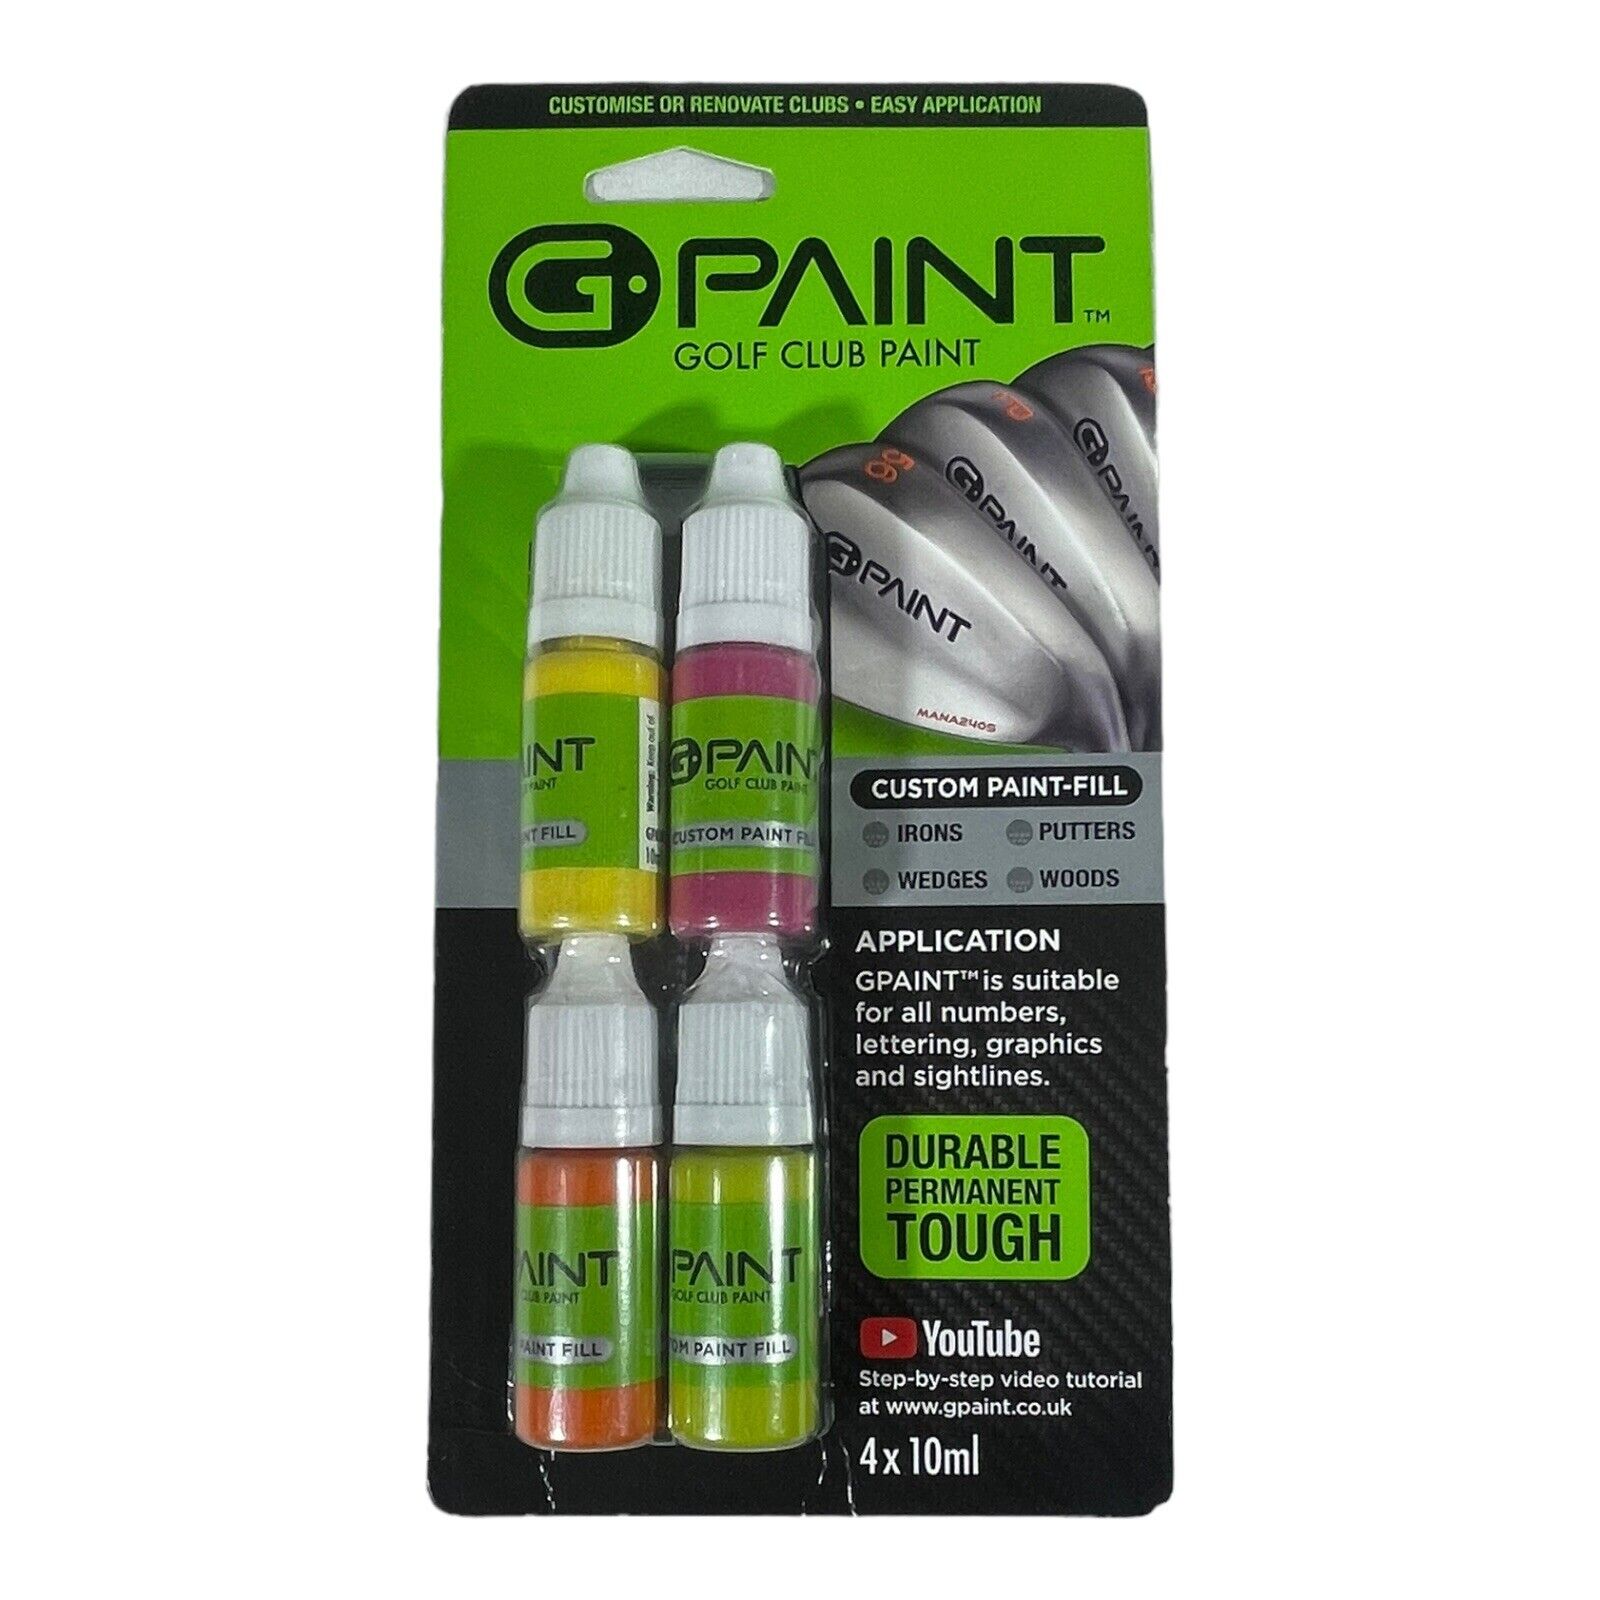 G-Paint Golf Club Paint - Touch Up - Fill In - Customize Clubs SLIGHTLY TEAR NIB